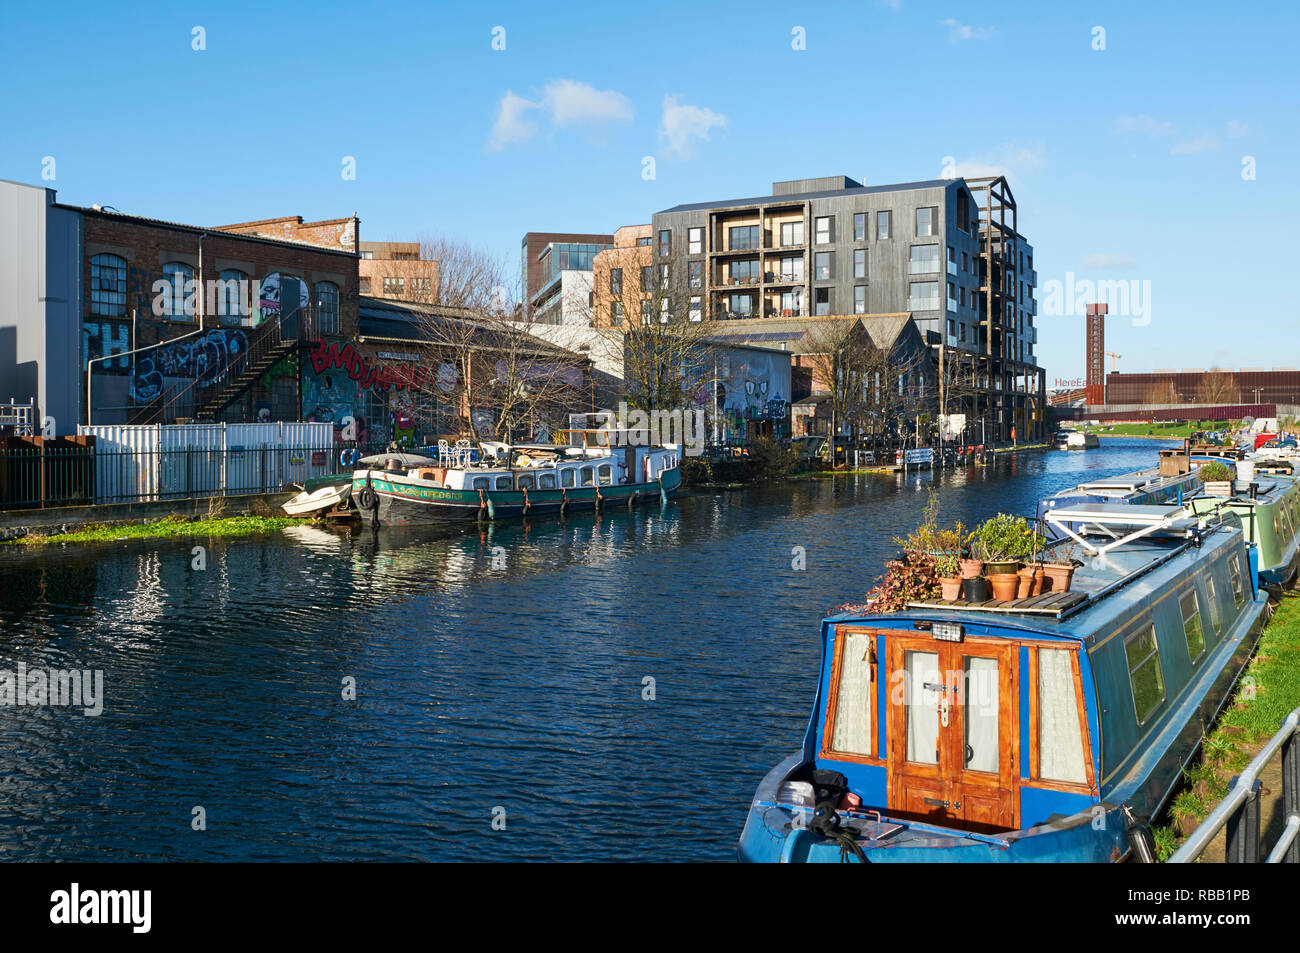 Warehouses and apartments along the River Lea near Hackney Wick, East London, UK Stock Photo